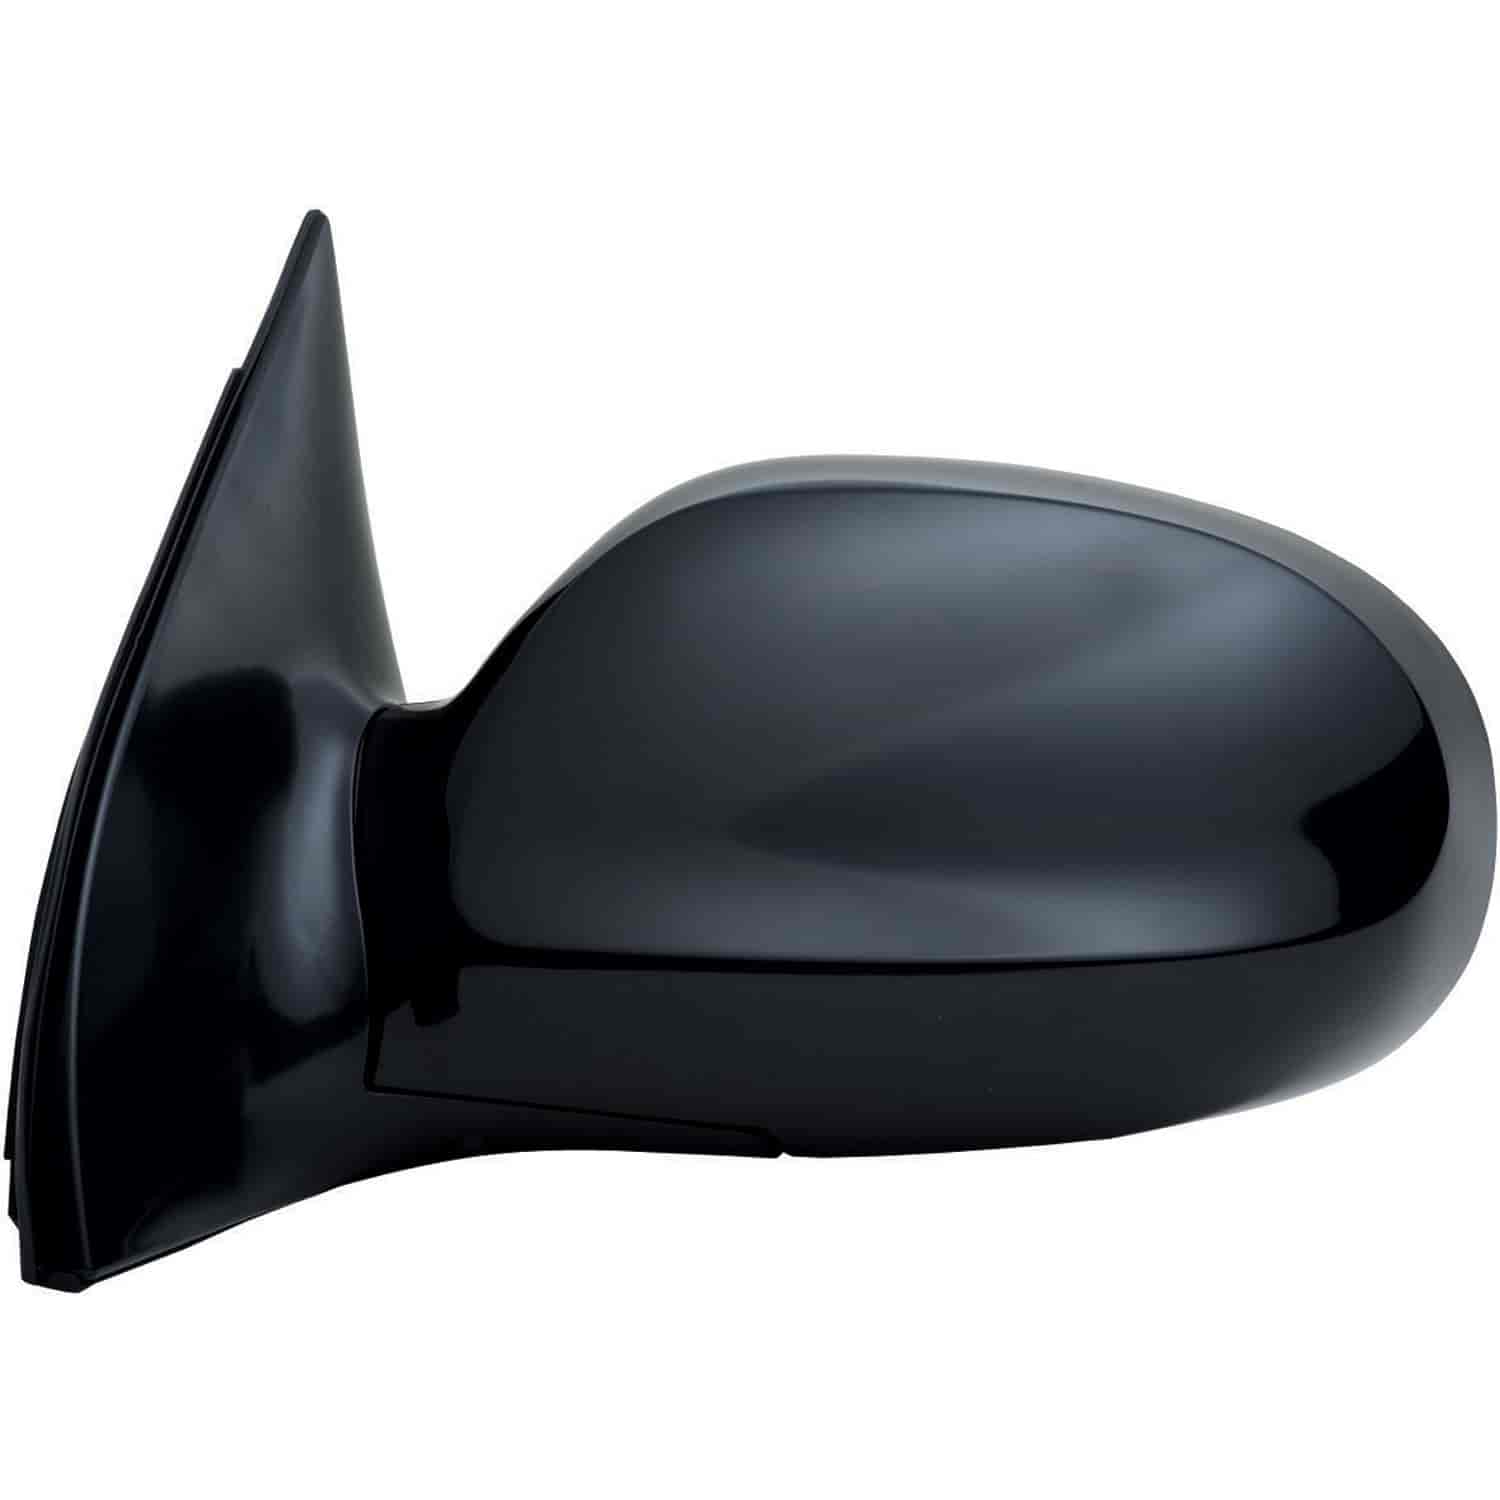 OEM Style Replacement mirror for 02-05 Kia Sedona EX model driver side mirror tested to fit and func